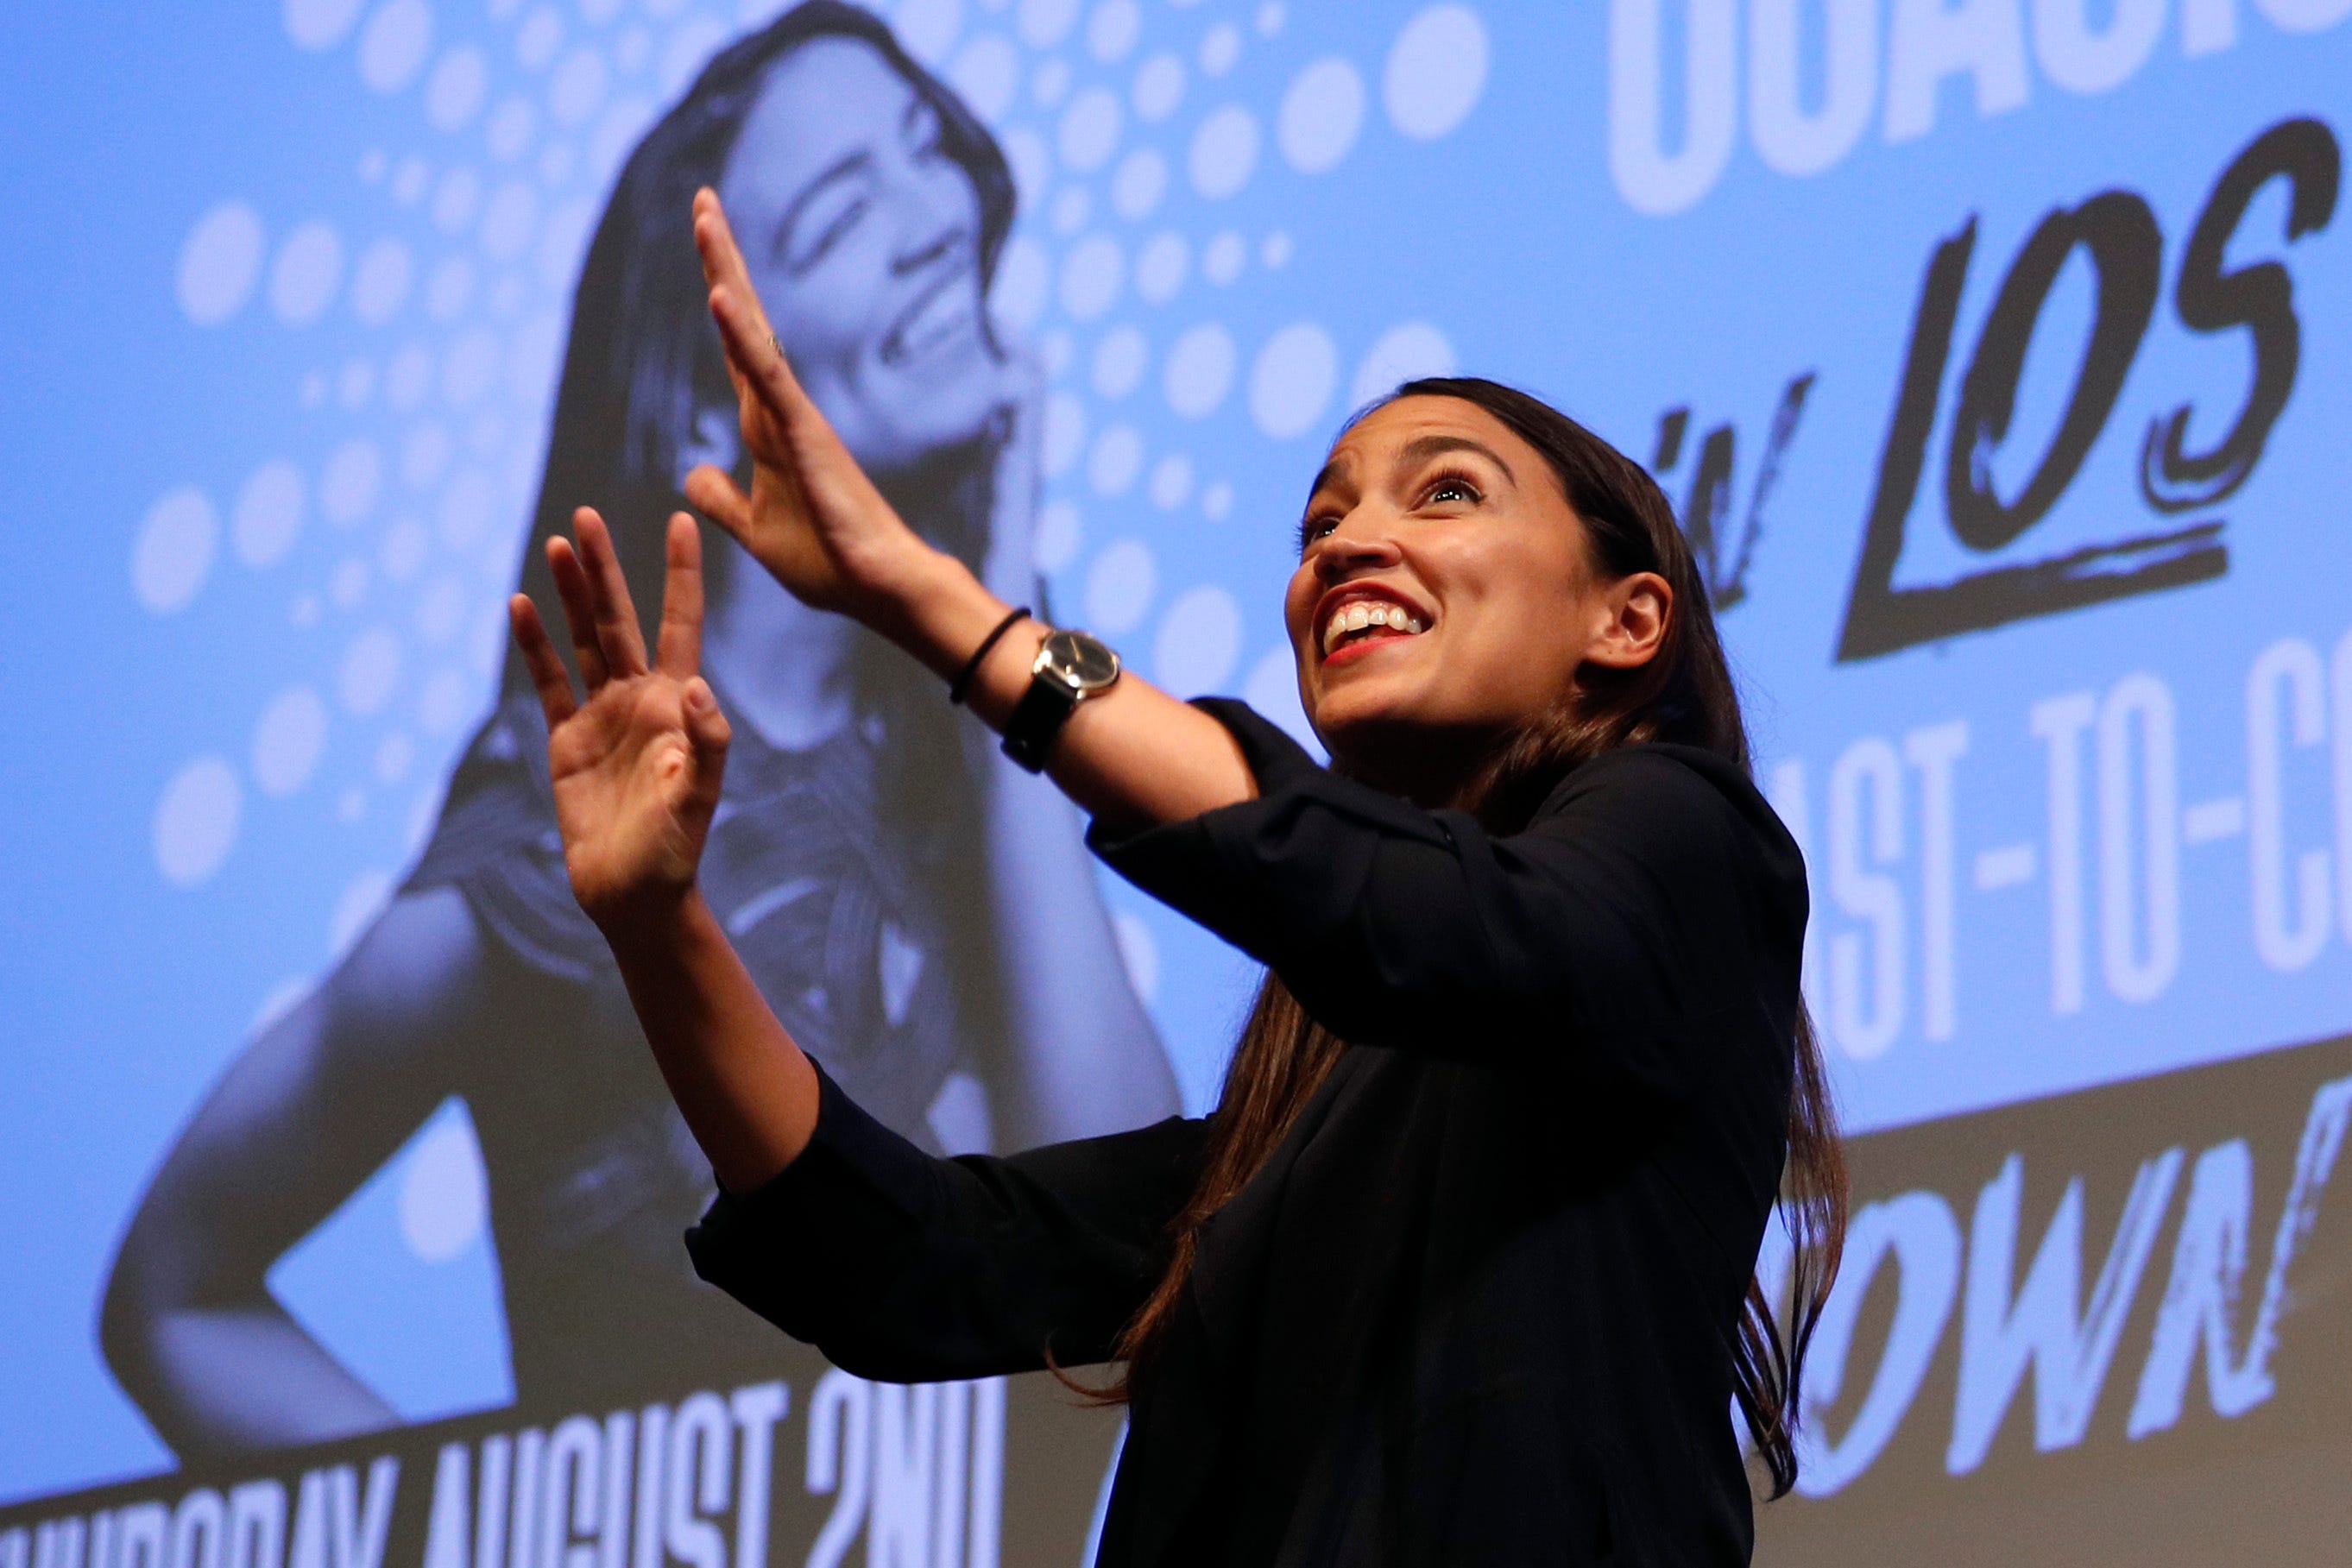 Alexandria Ocasio-Cortez, a winner of a Democratic Congressional primary in New York, acknowledges her supporters as she is introduced at a fundraiser Thursday, Aug. 2, 2018, in Los Angeles.